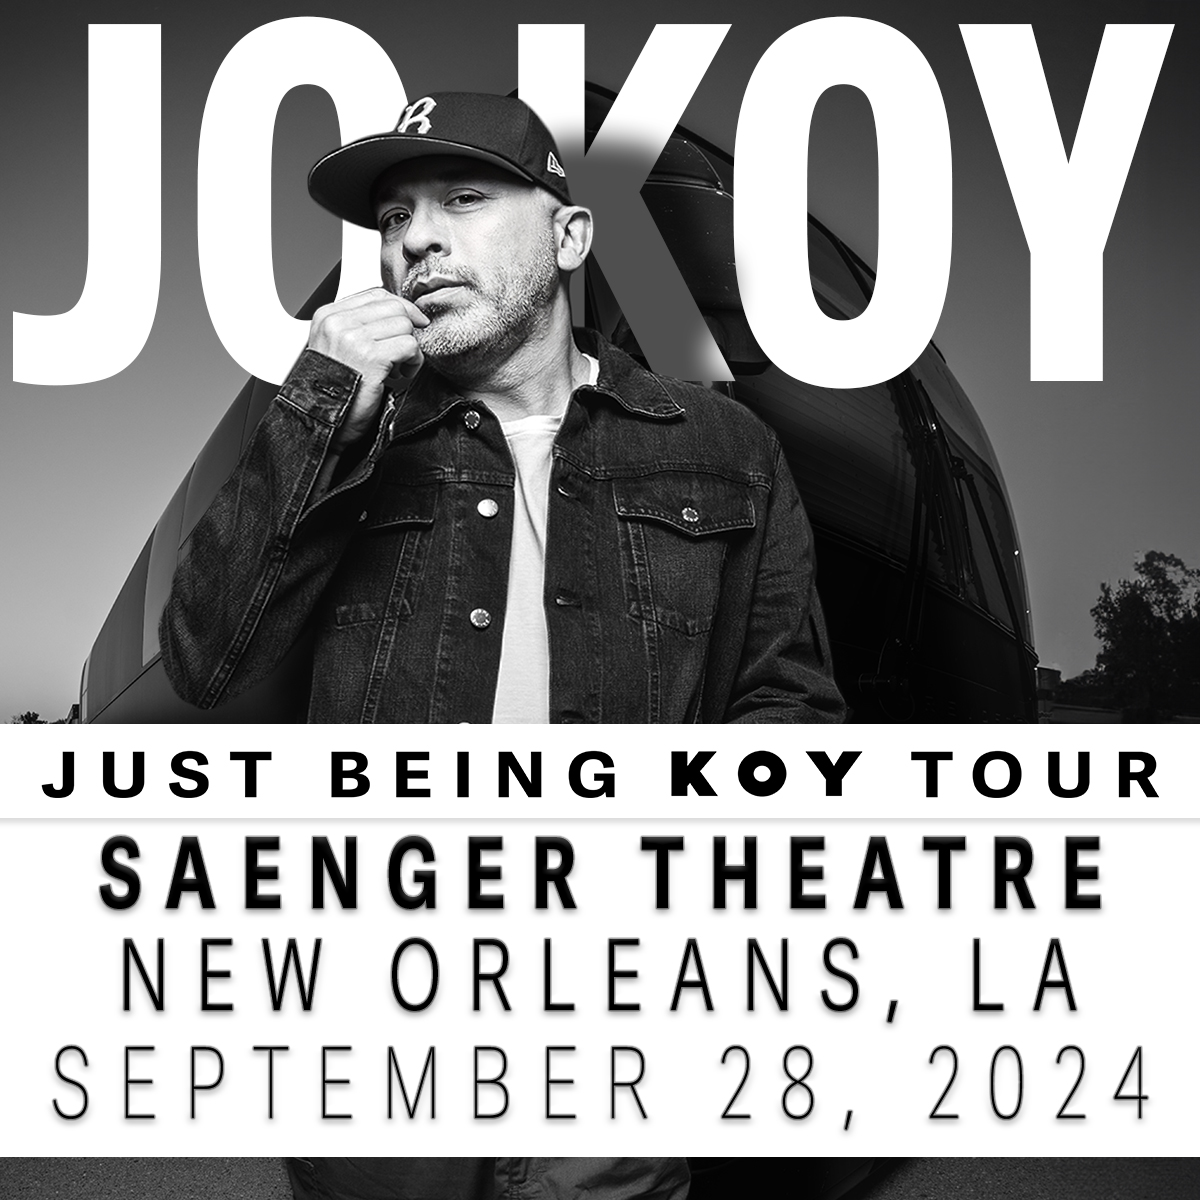 JUST ANNOUNCED! Jo Koy: Just Being Koy Tour coming to #SaengerNOLA Saturday, September 28! Tickets on sale Thursday at noon!